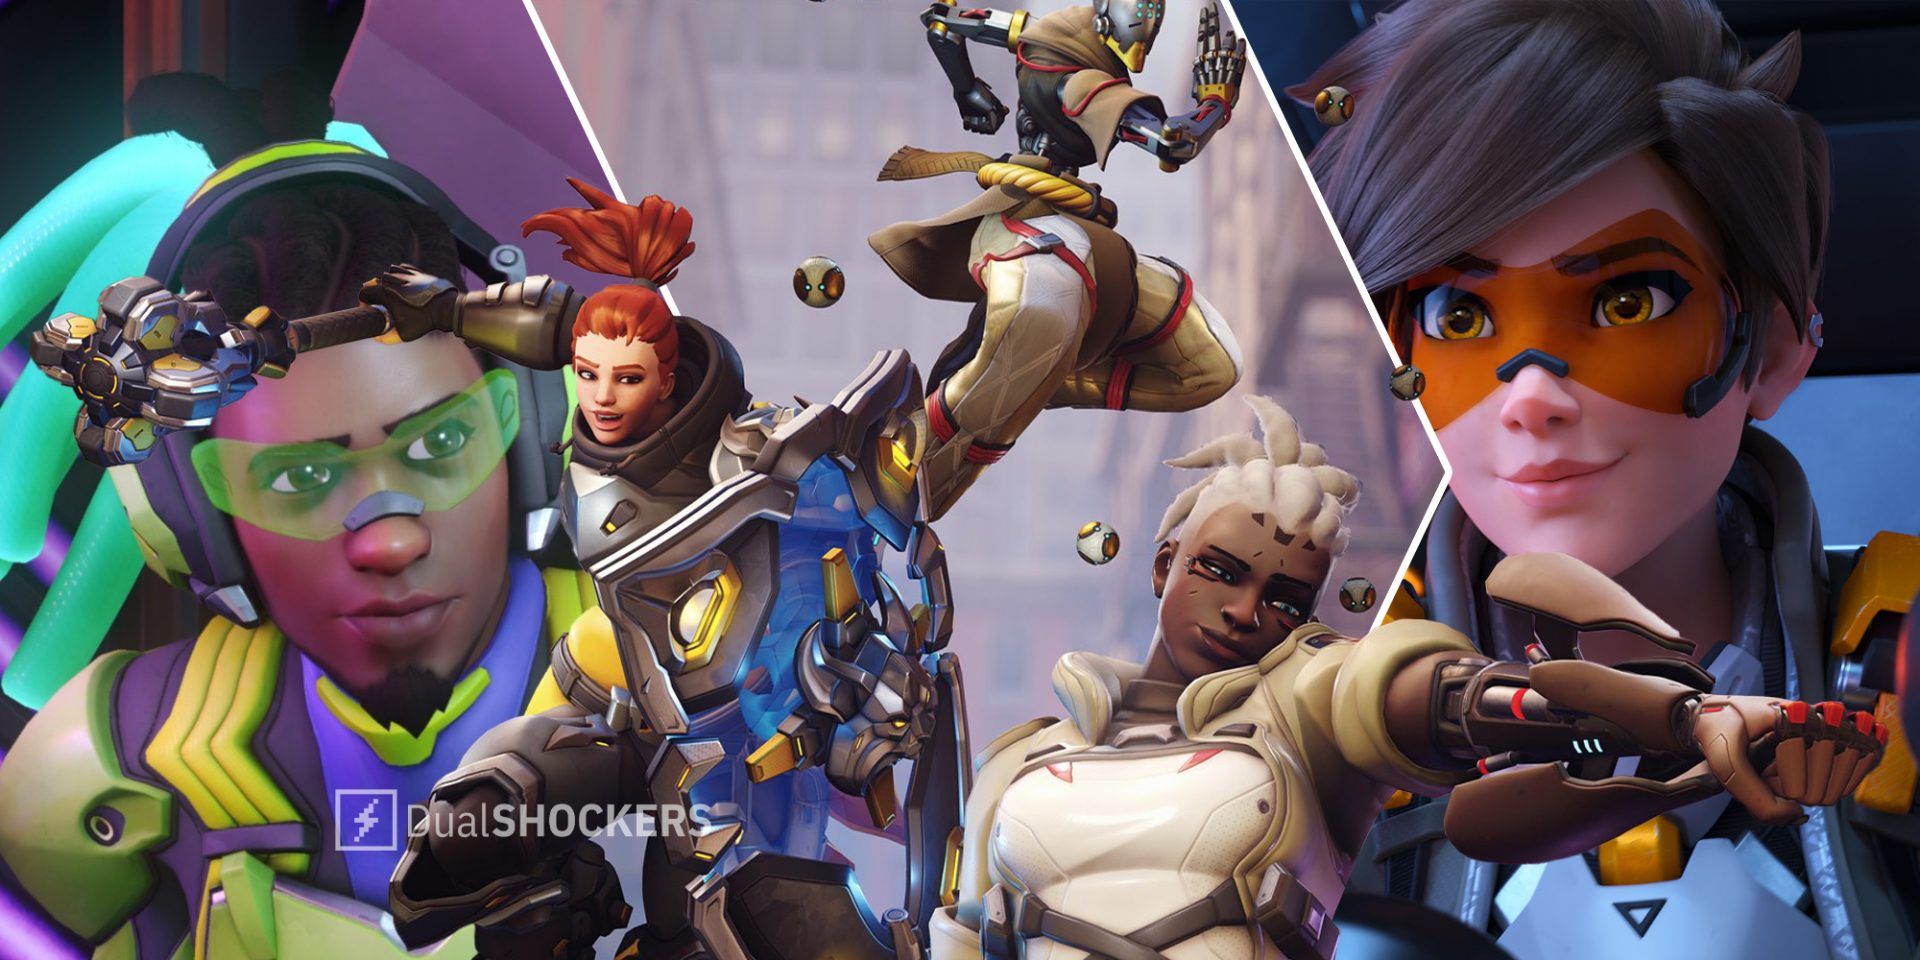 Overwatch 2 Lucio on left, Brigitte, Sigma, and Sojourn in middle, Tracer on right